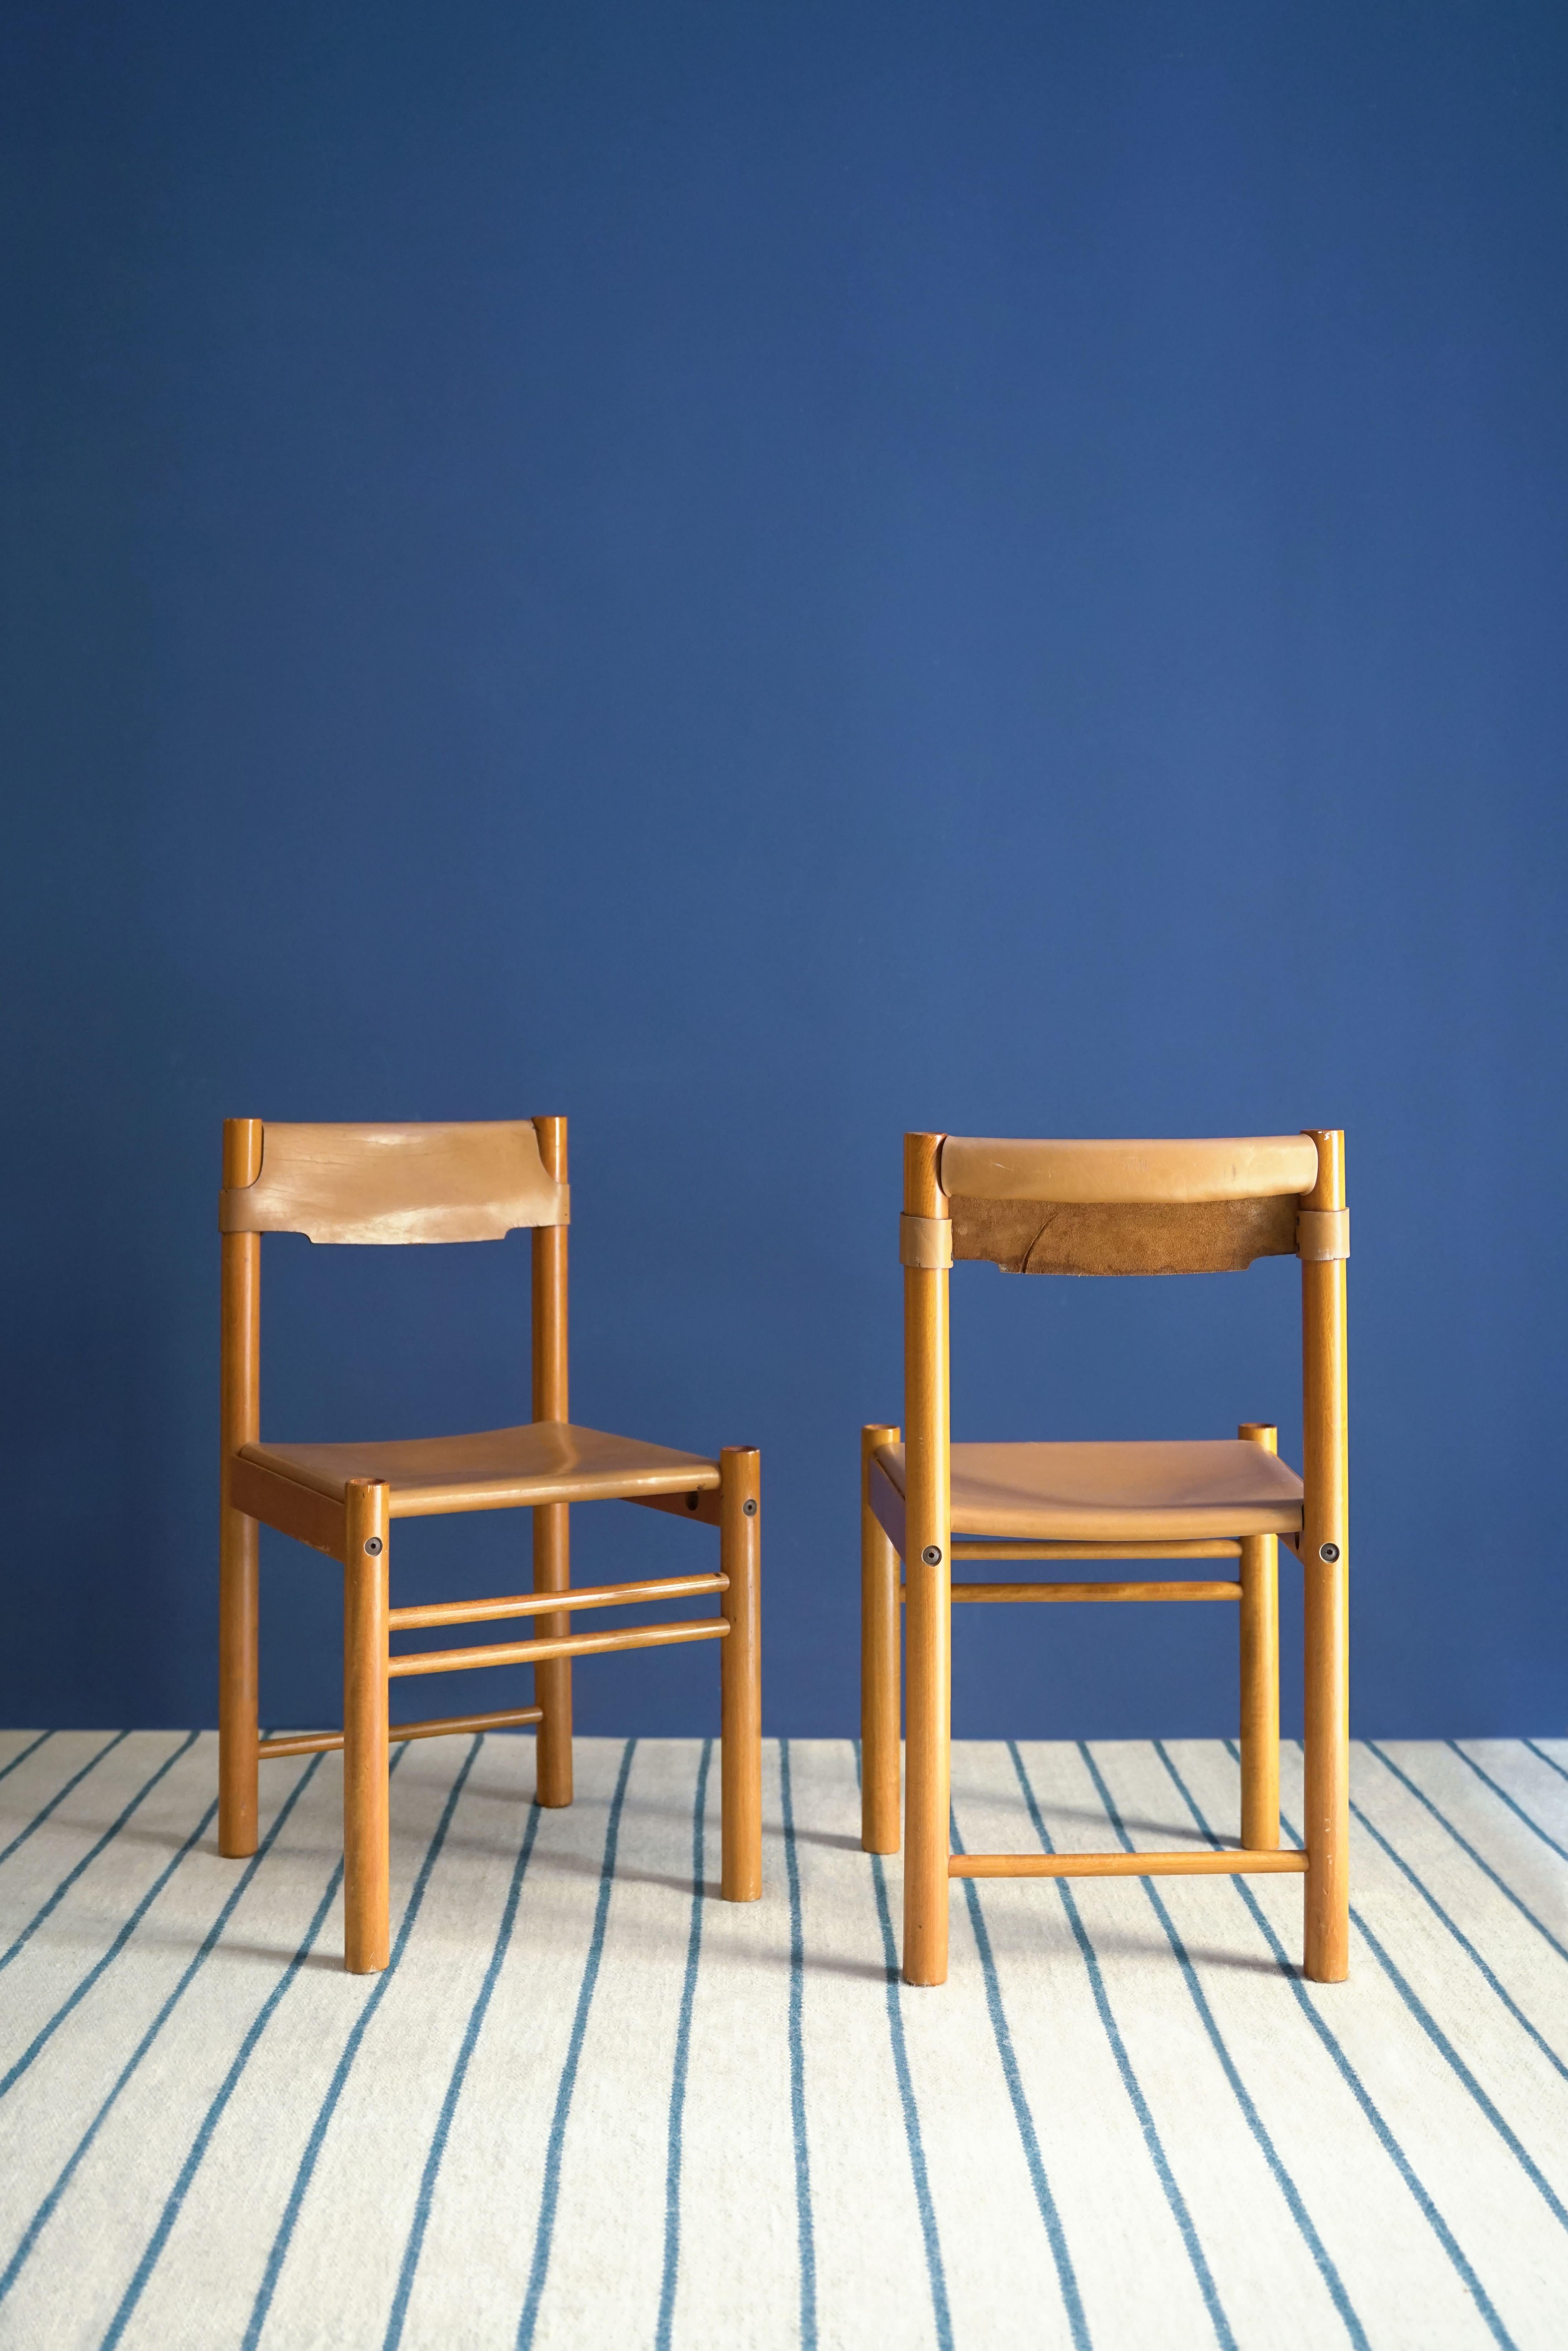 Set of 6 Safari chairs by Ibisco Sedie, beech wood and leather. Made in Italy, 1960s.

